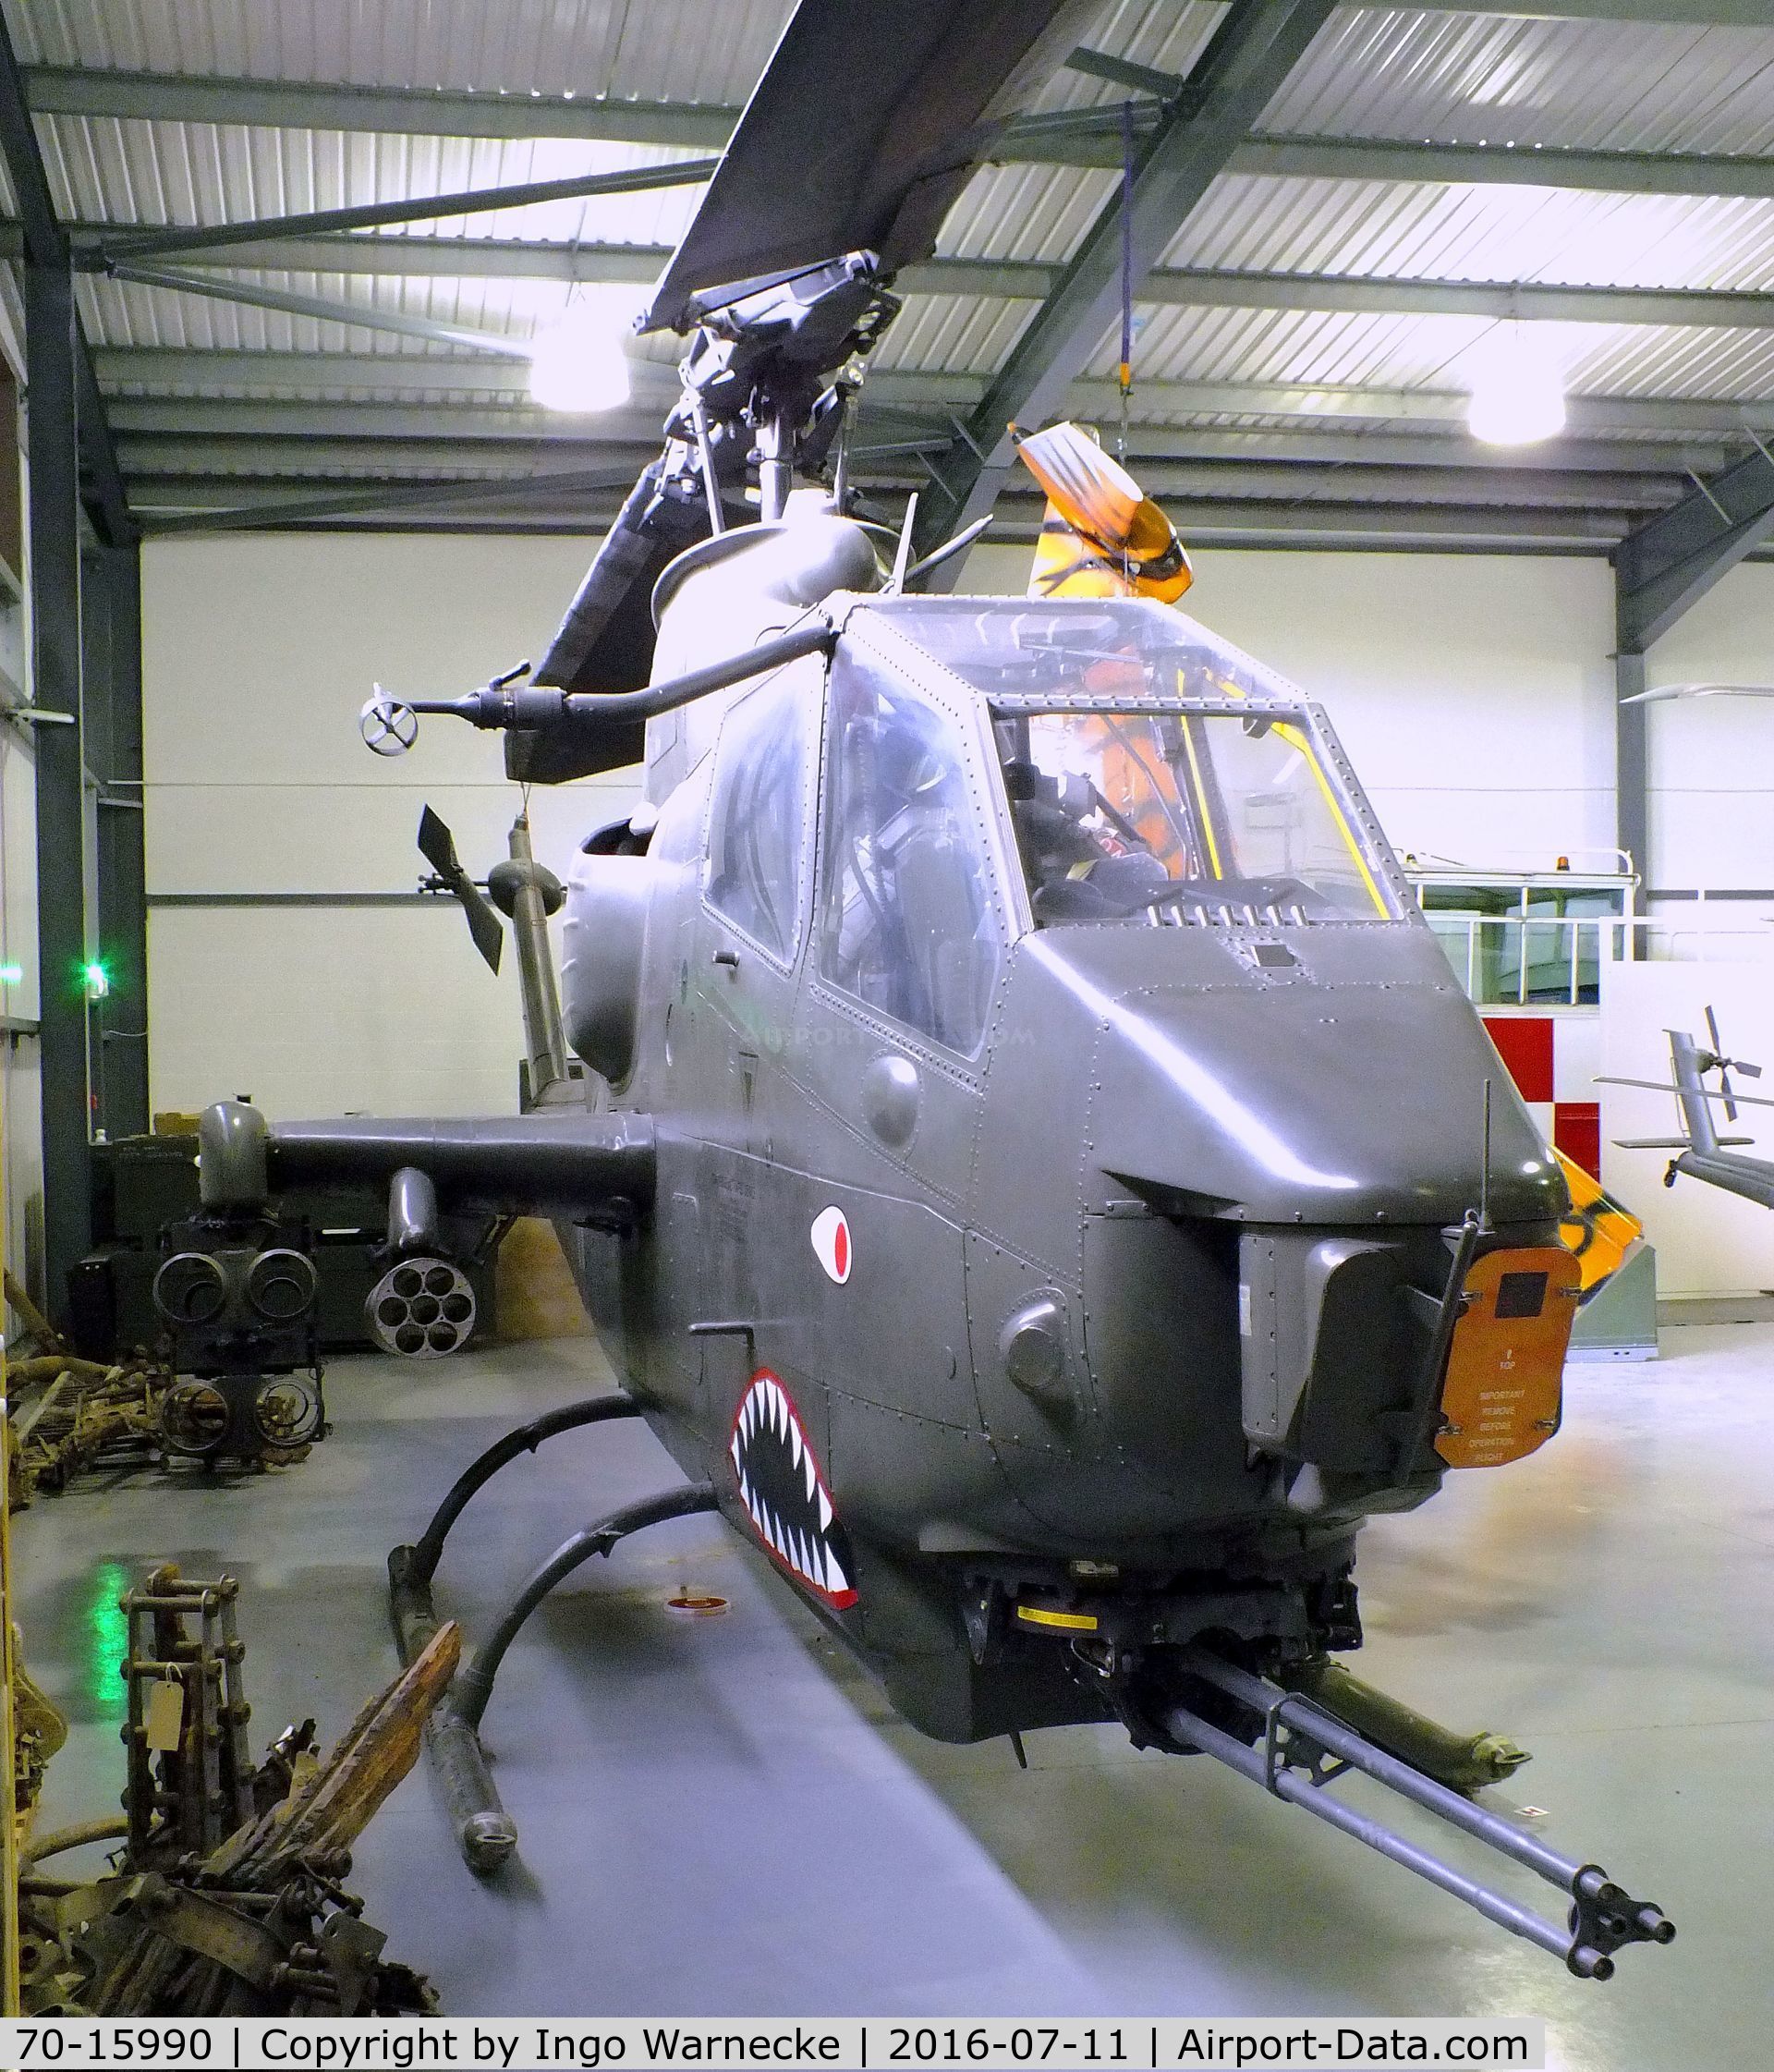 70-15990, 1970 Bell AH-1F Cobra C/N 20934, Bell AH-1F Cobra at the Museum of Army Flying, Middle Wallop